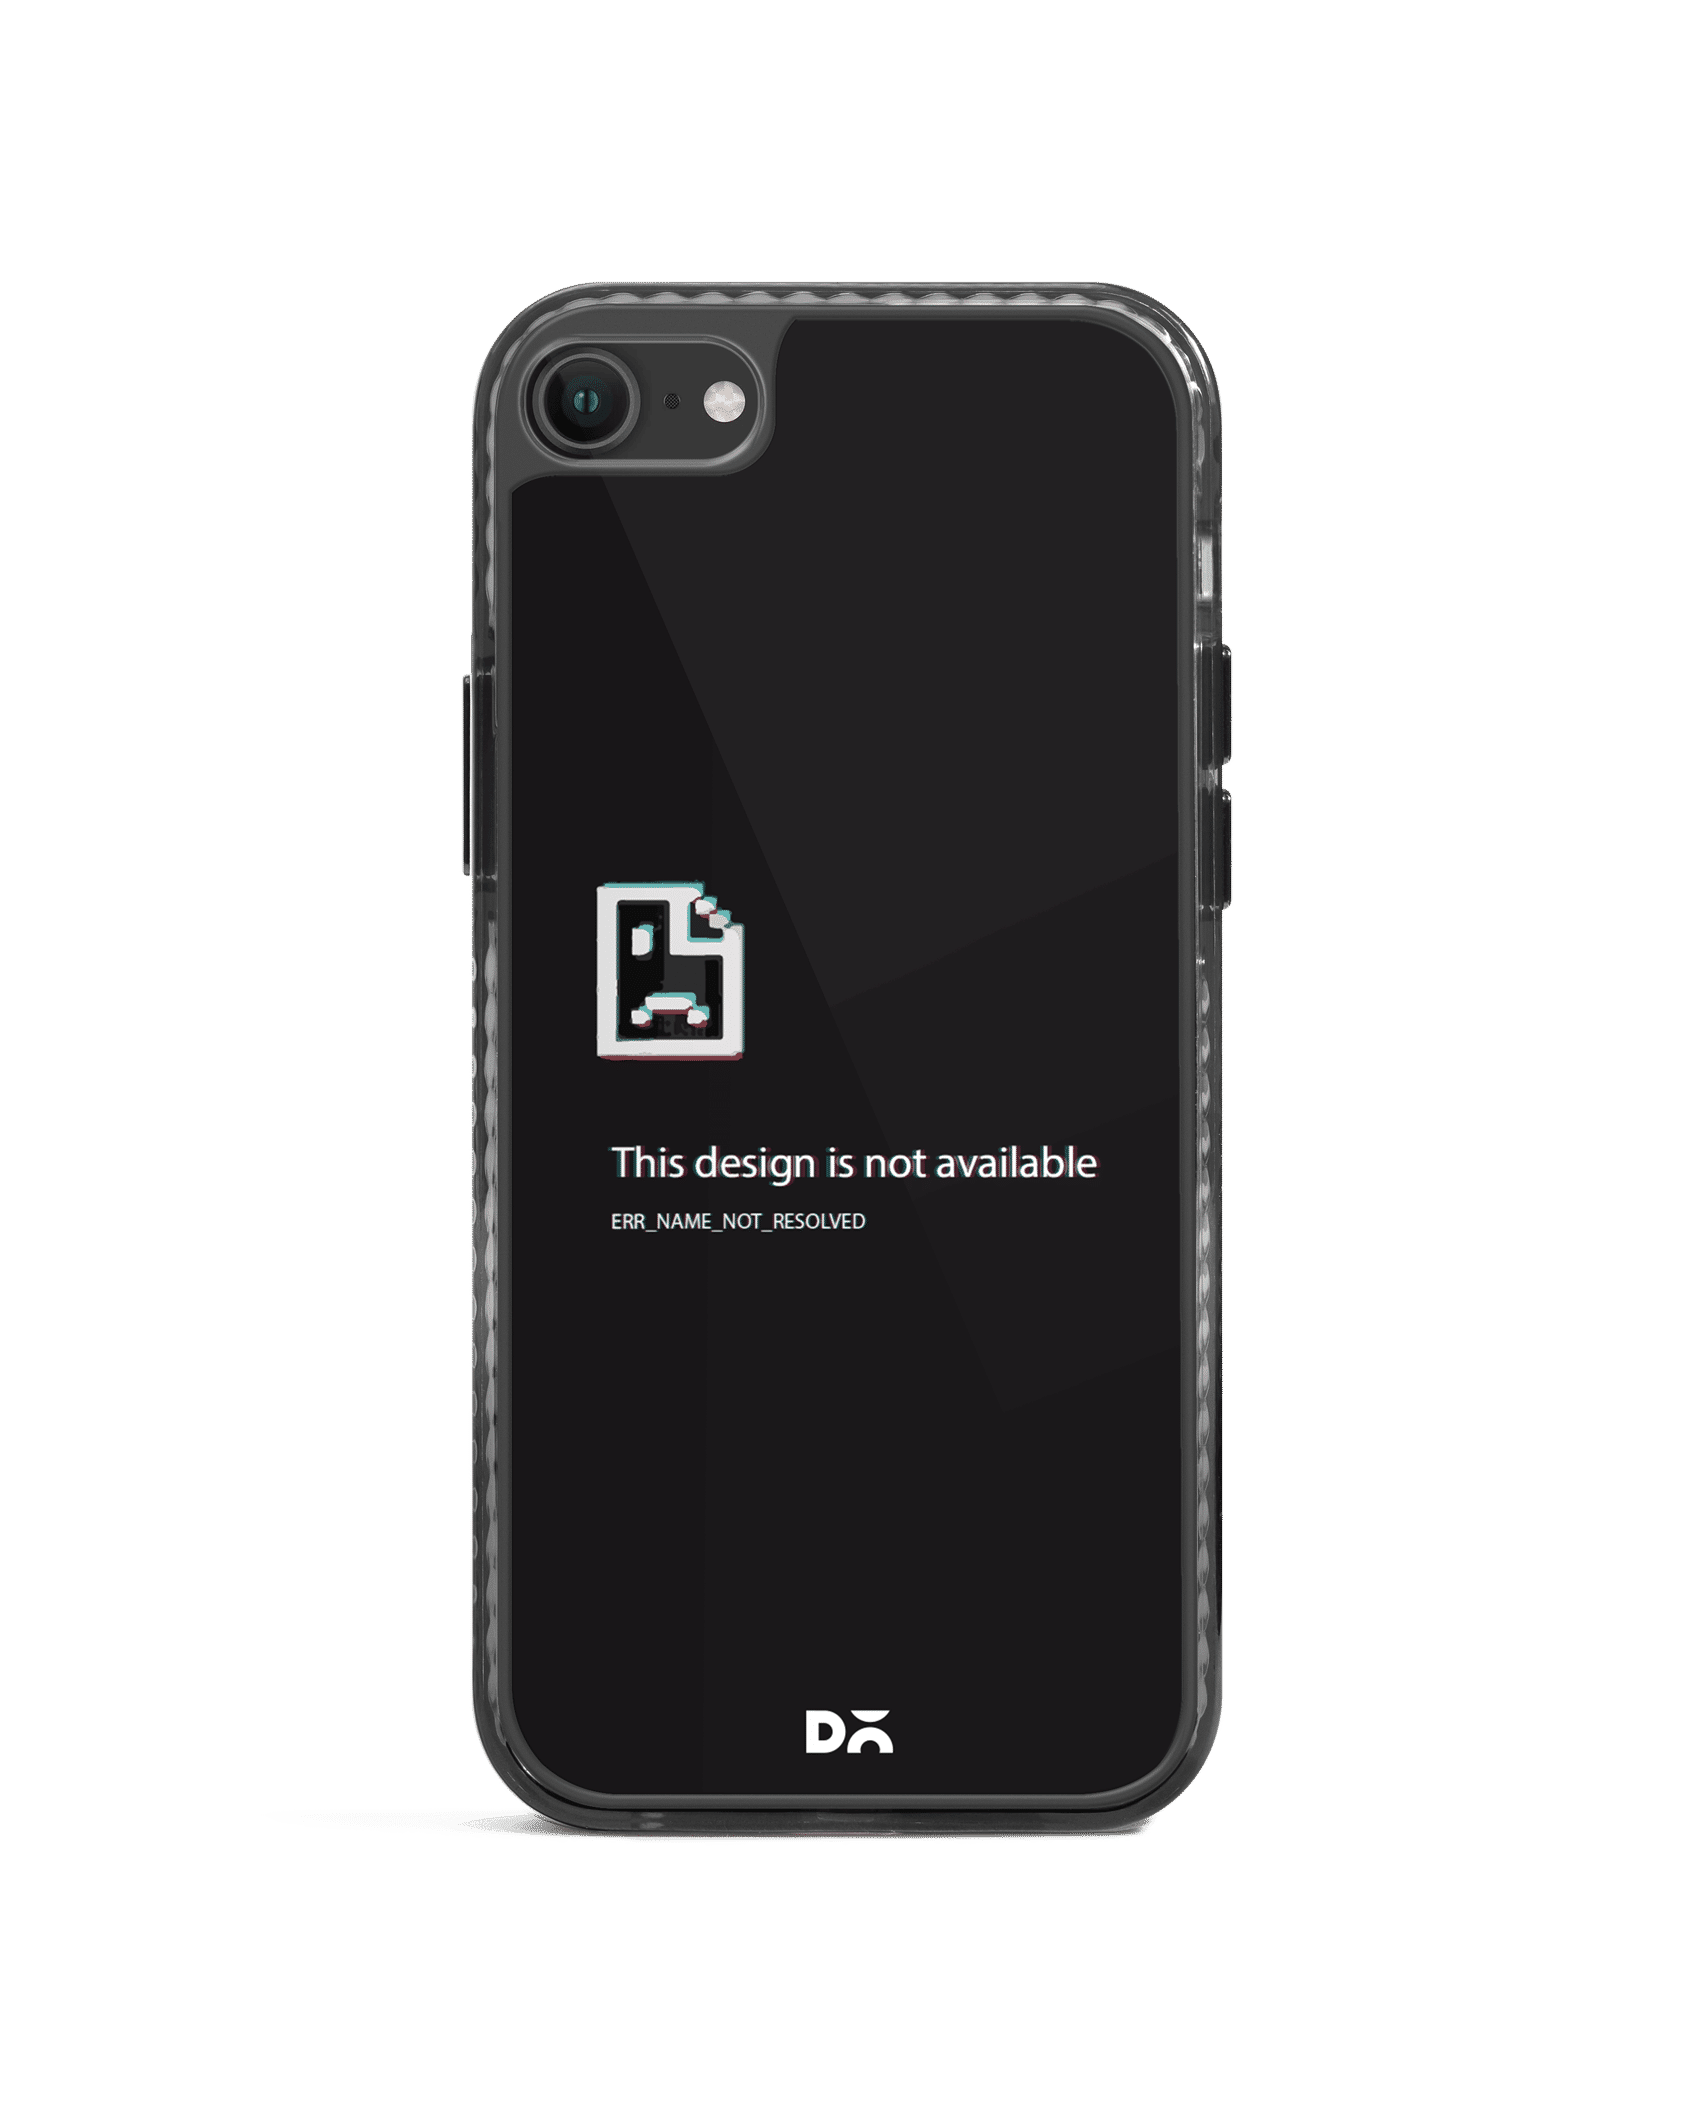 Black Abstract iPhone Wallpapers Top 25 Best Black Abstract iPhone  Wallpapers  Getty Wallpapers